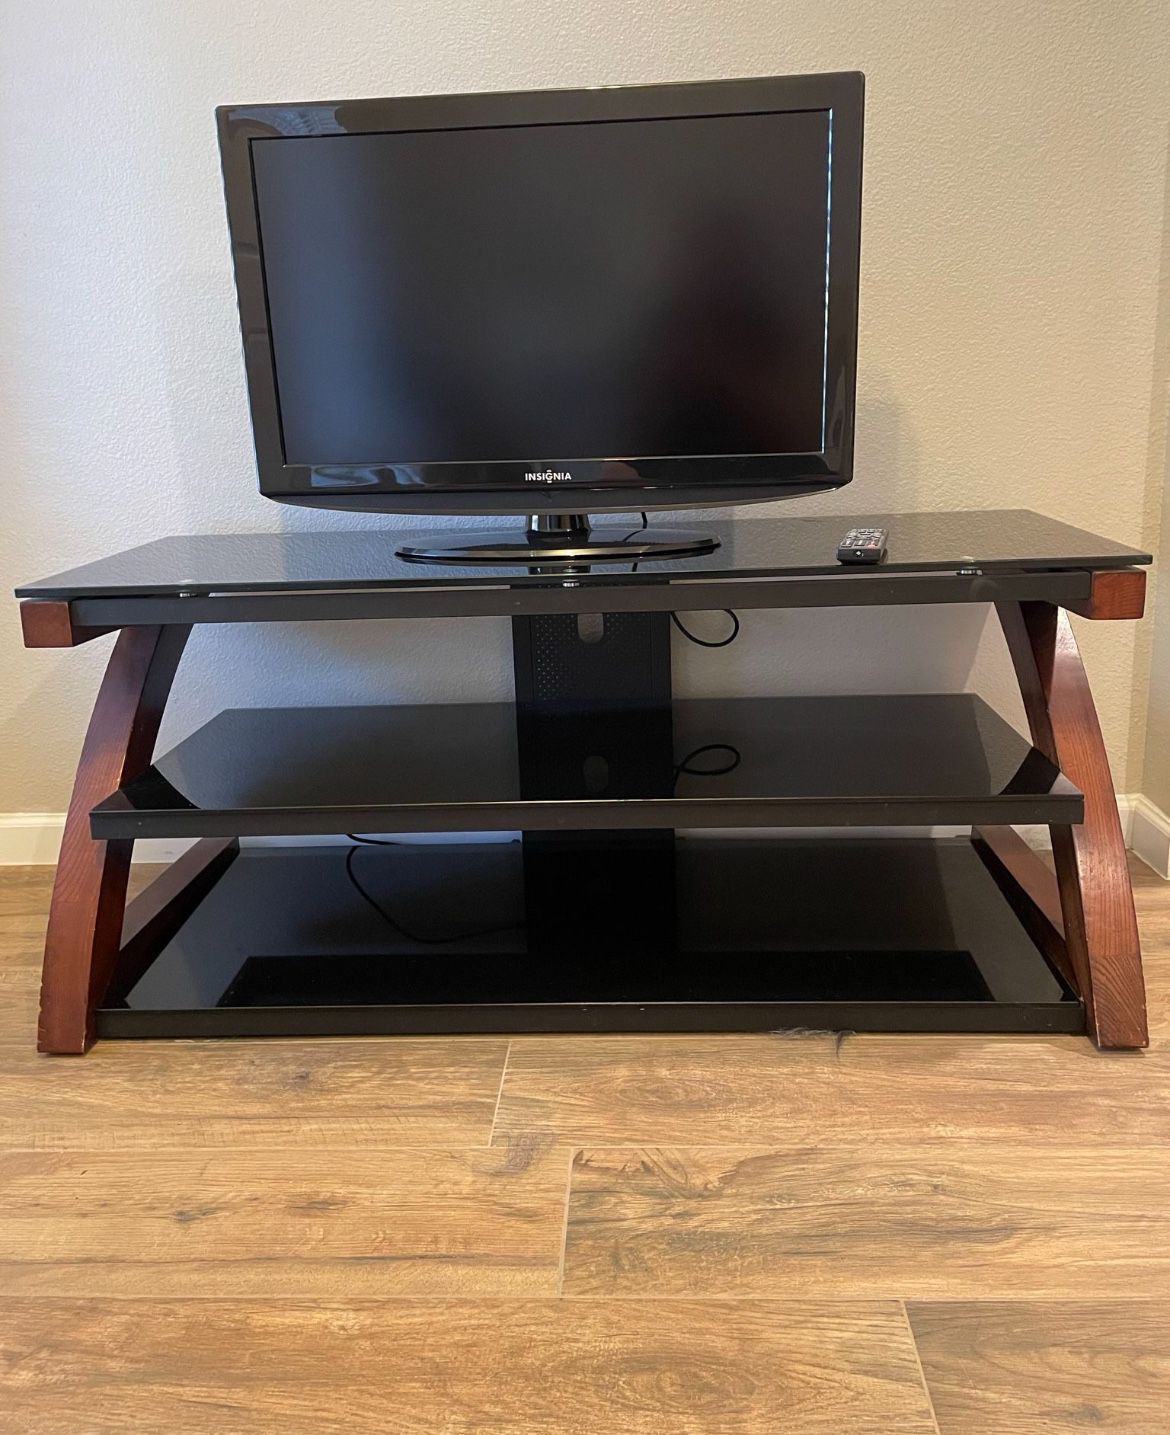 TV Stand and TV